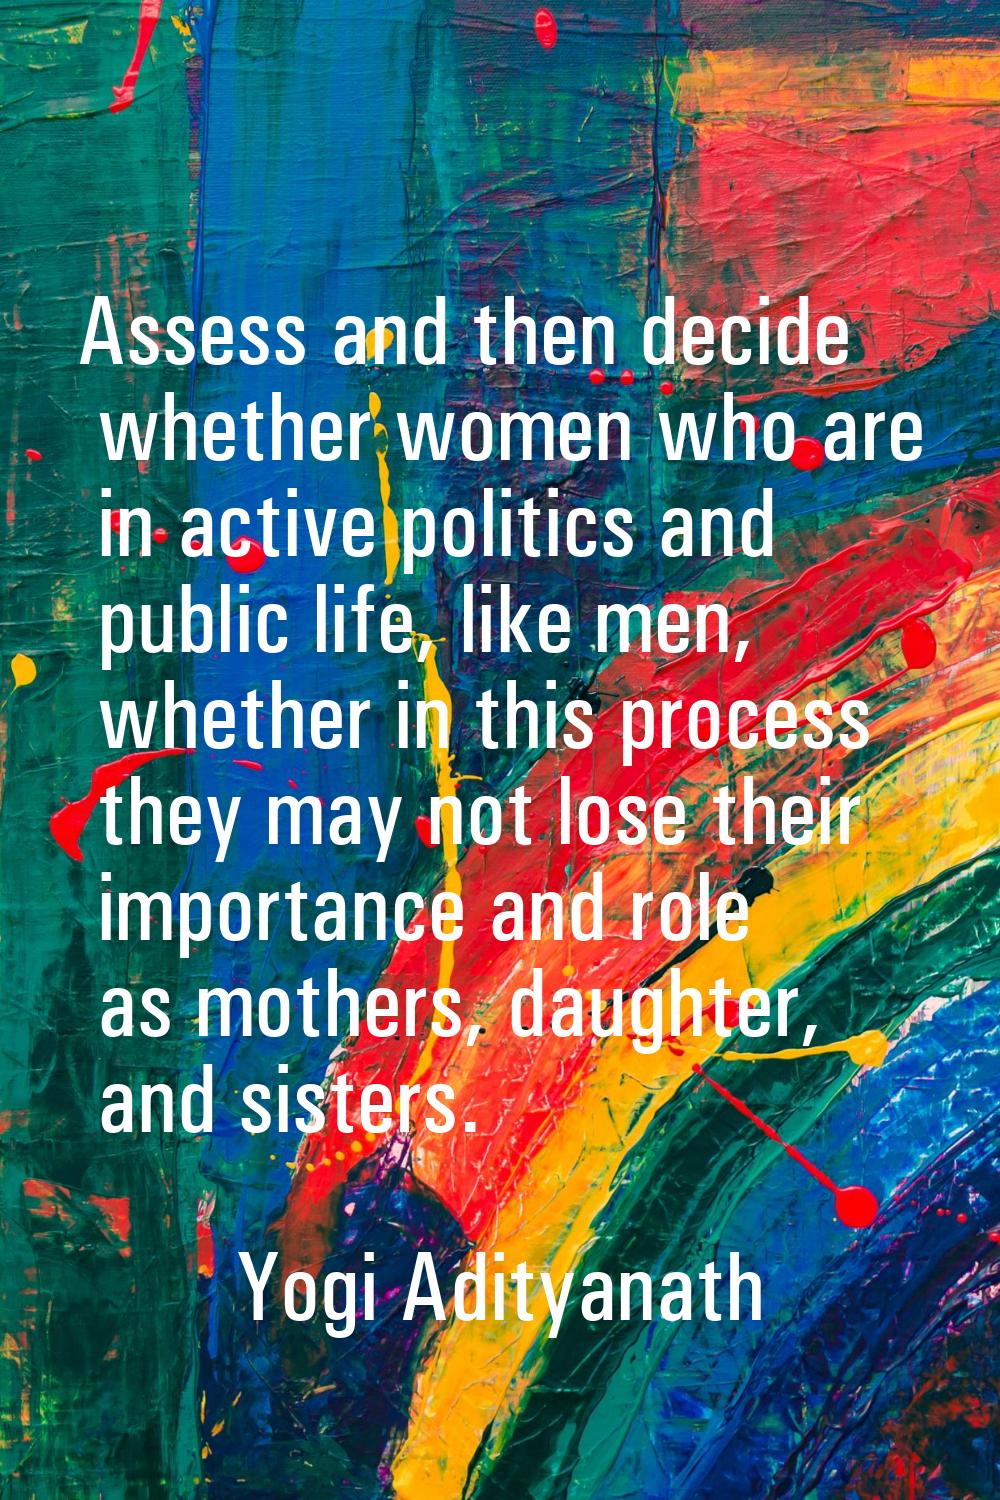 Assess and then decide whether women who are in active politics and public life, like men, whether 